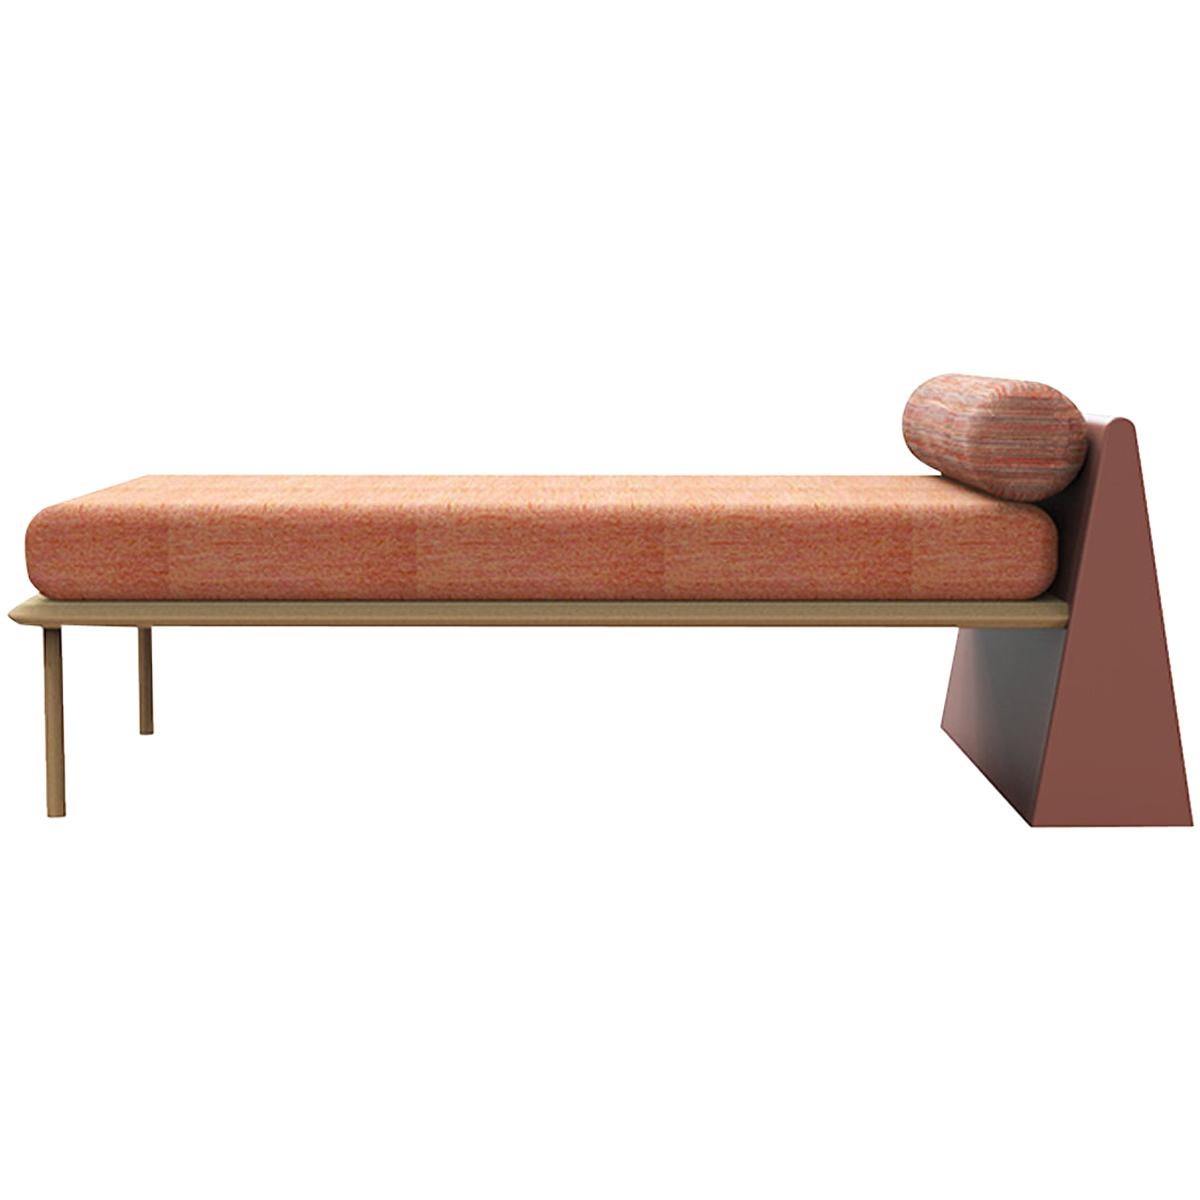 Minimalist Mid-Century Modern Style Solid Wood Bench Upholstered in Textile